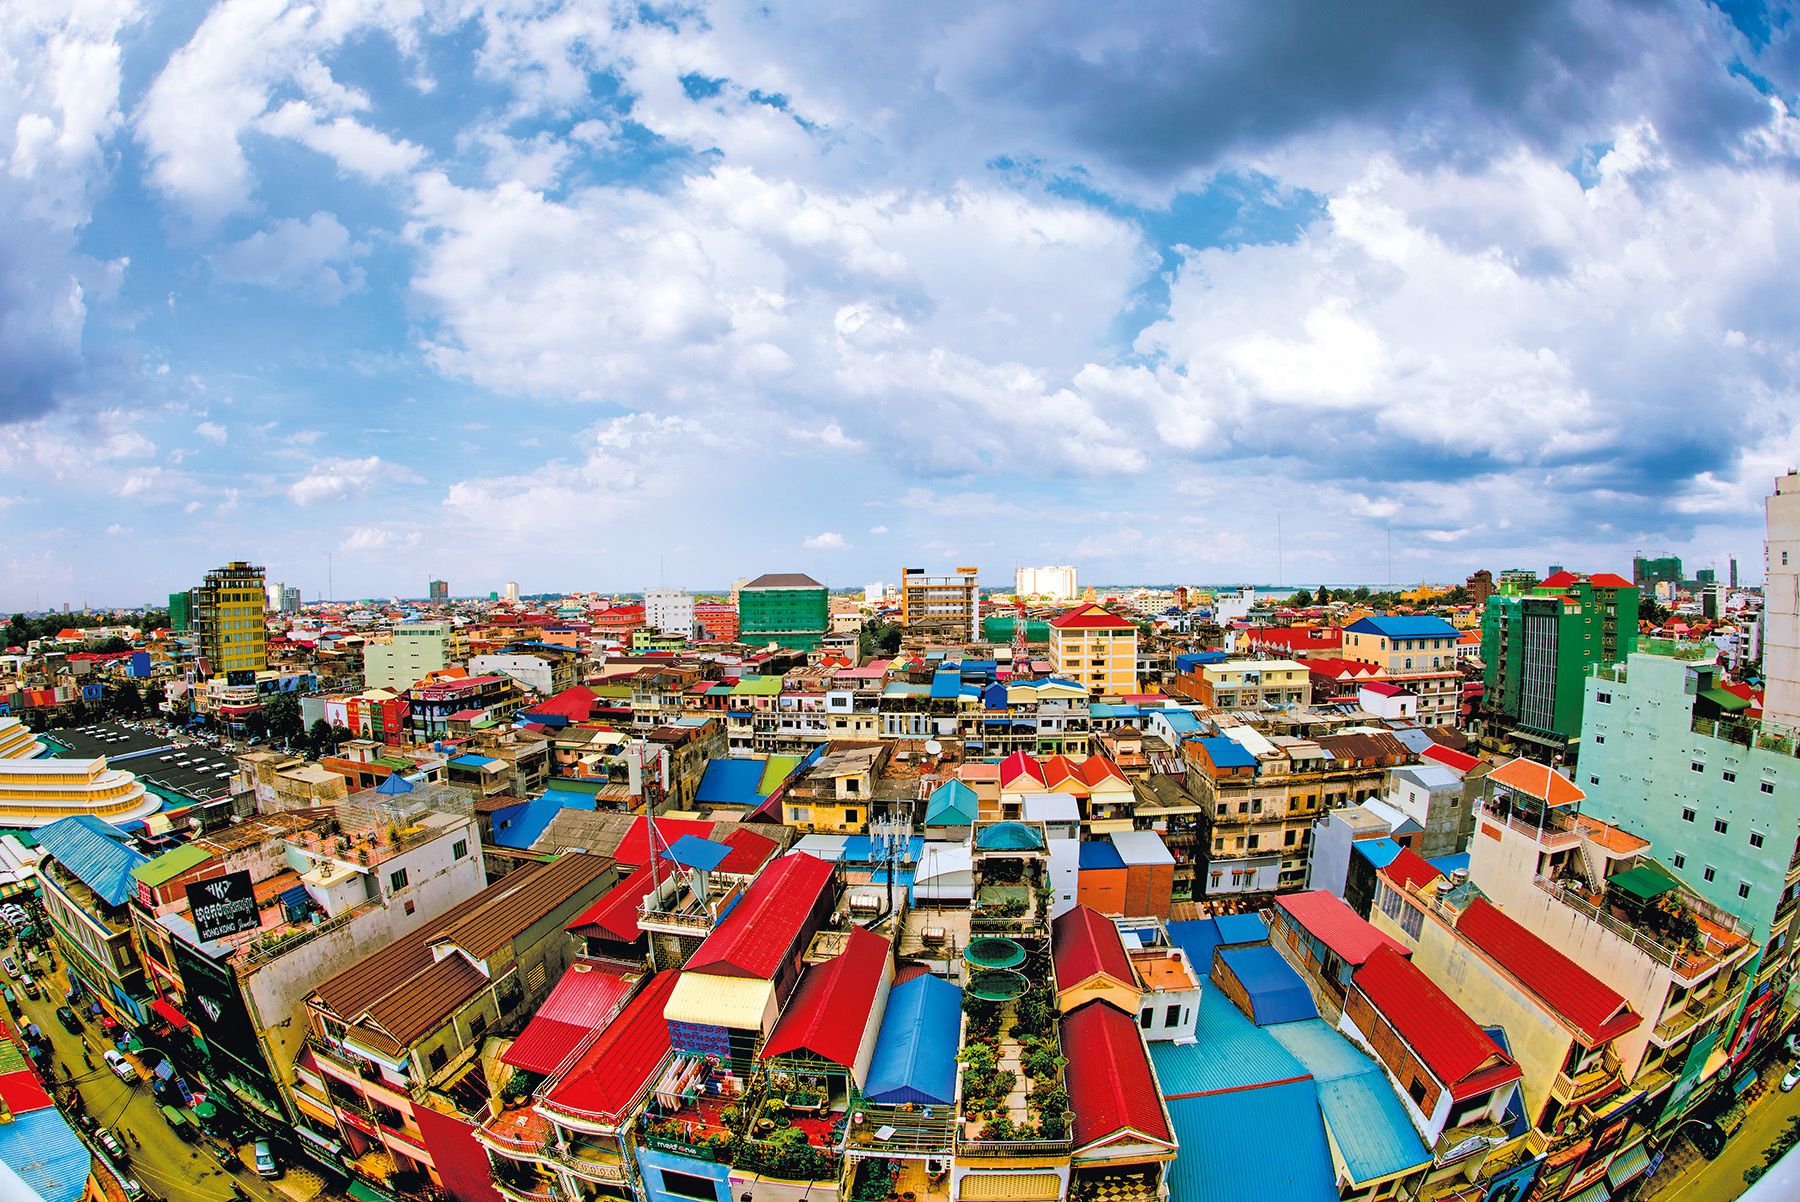 A view of Cambodia's capital, Phnom Penh - one of the fast-growing cities in Asia.Photo credits: Iwan Bagus/IFC